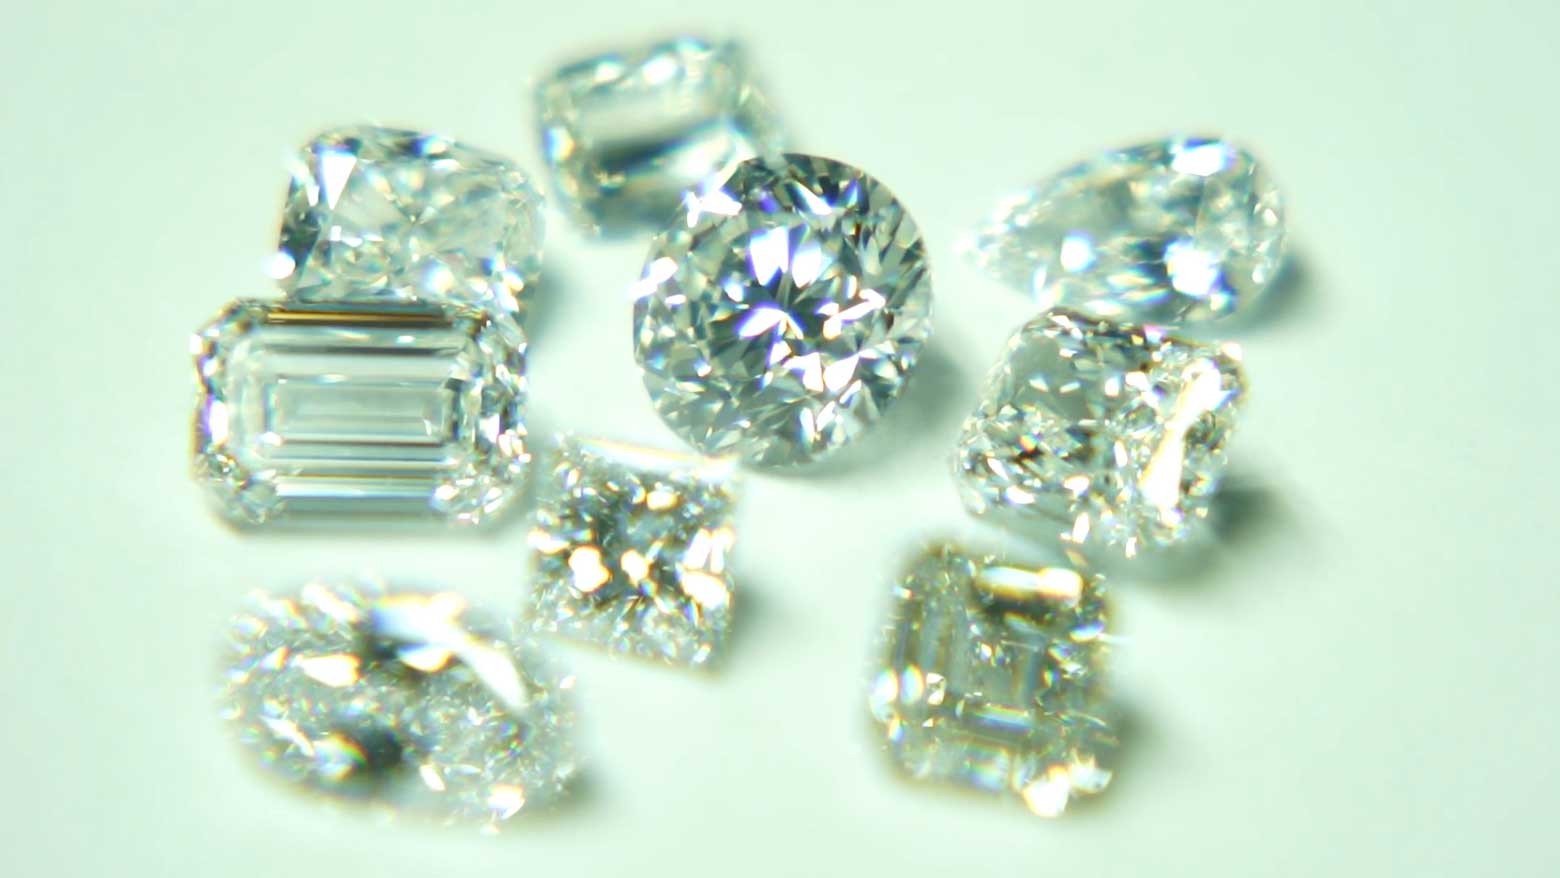 Russia's invasion puts India's diamond industry on the rocks